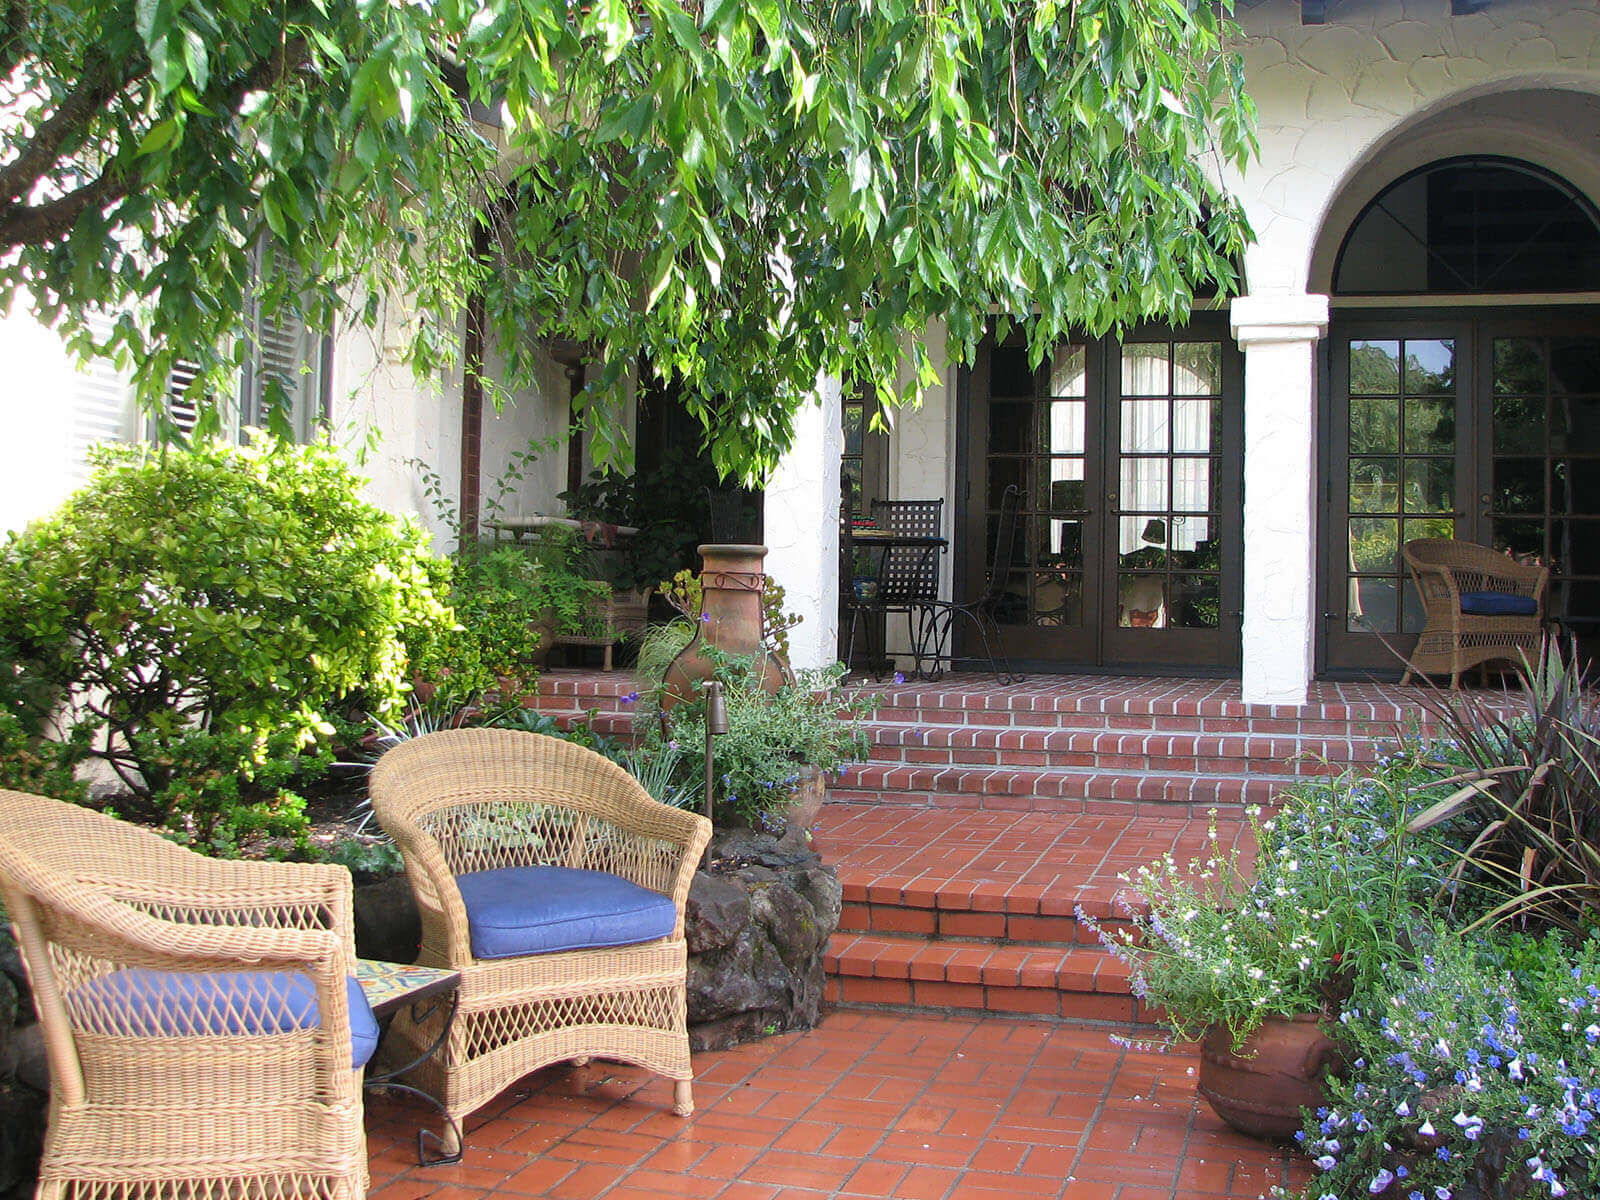 Spanish style entry courtyard with saltillo tile and elegant arches